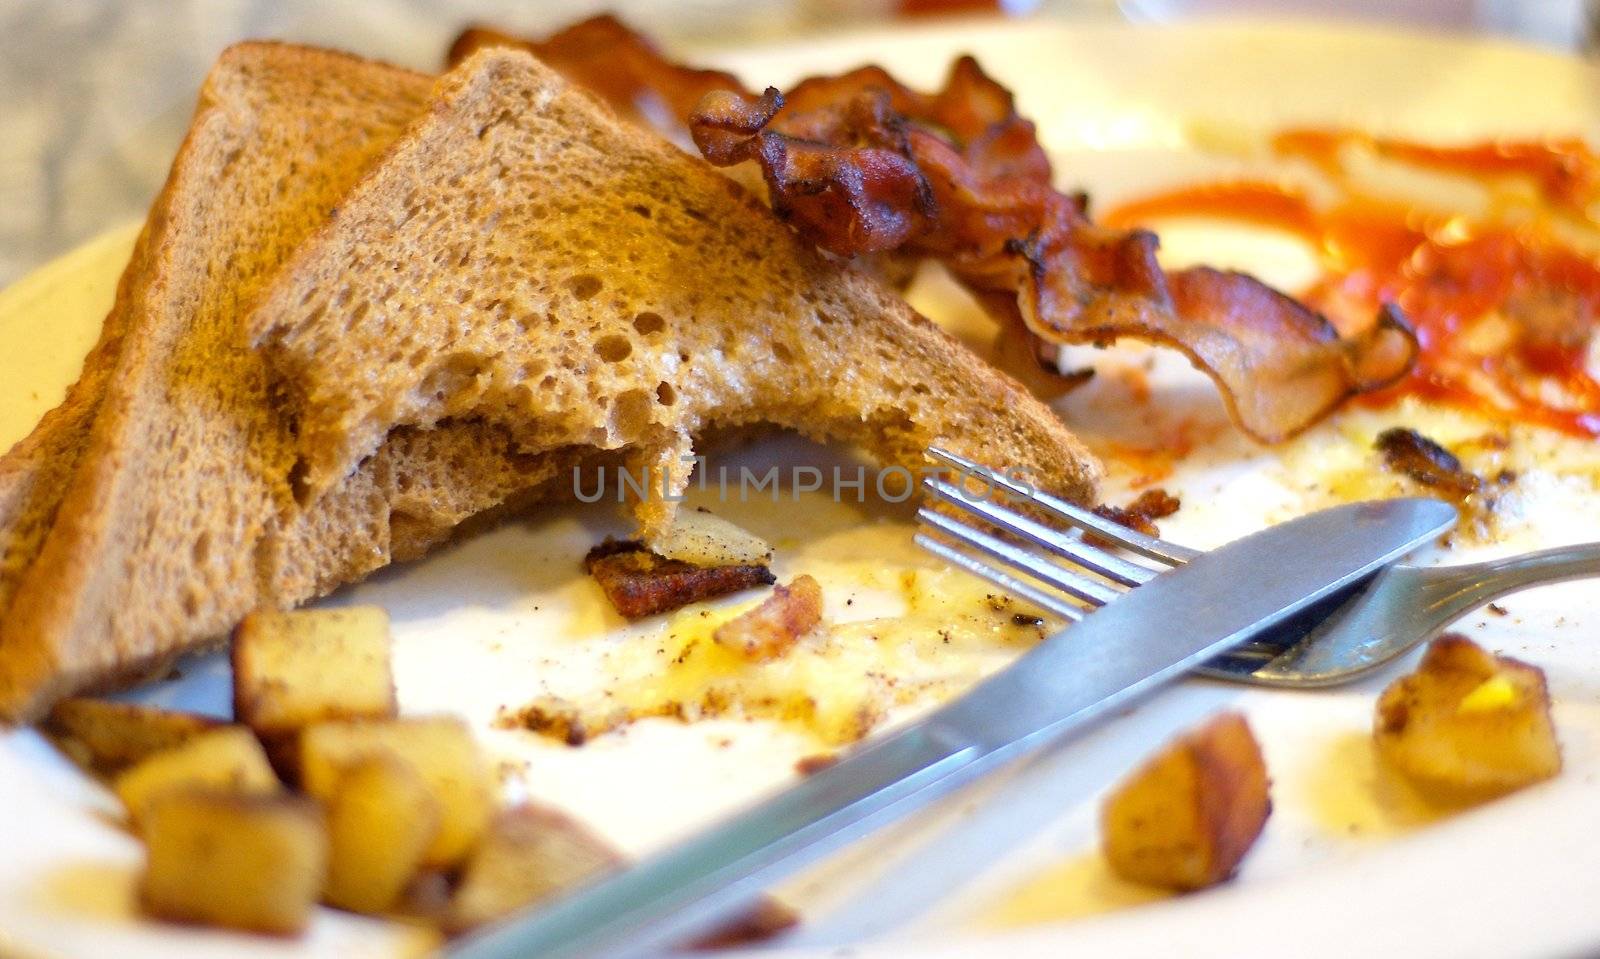 "Part of a complete breakfast" a play on words on the popular catchphrase with cereal commercials.  Home fries, toast, bacon and eggs.